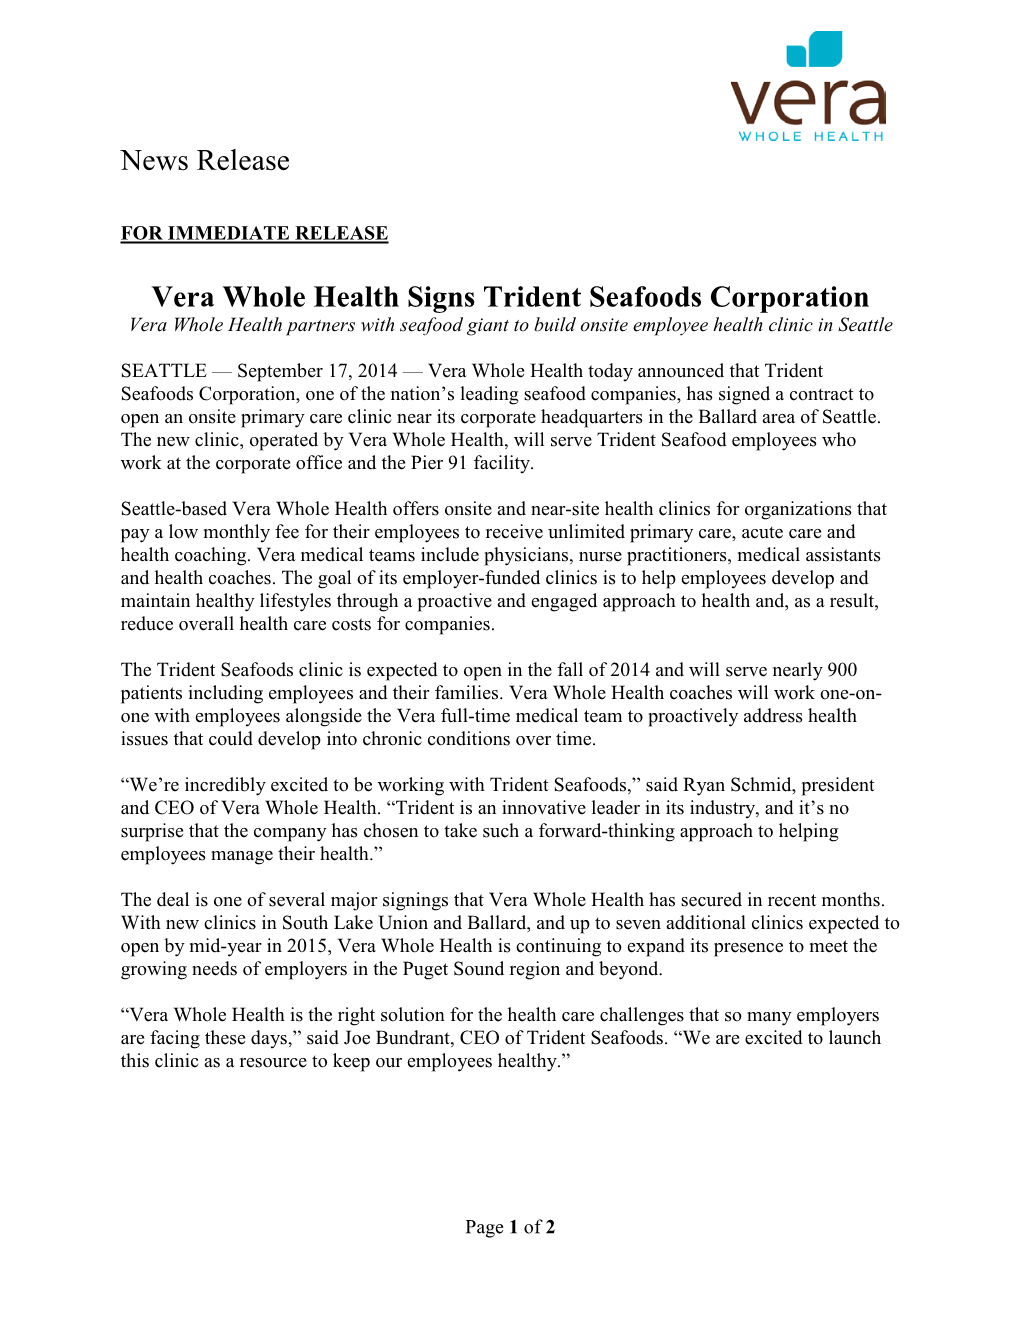 News Release Vera Whole Health Signs Trident Seafoods Corporation